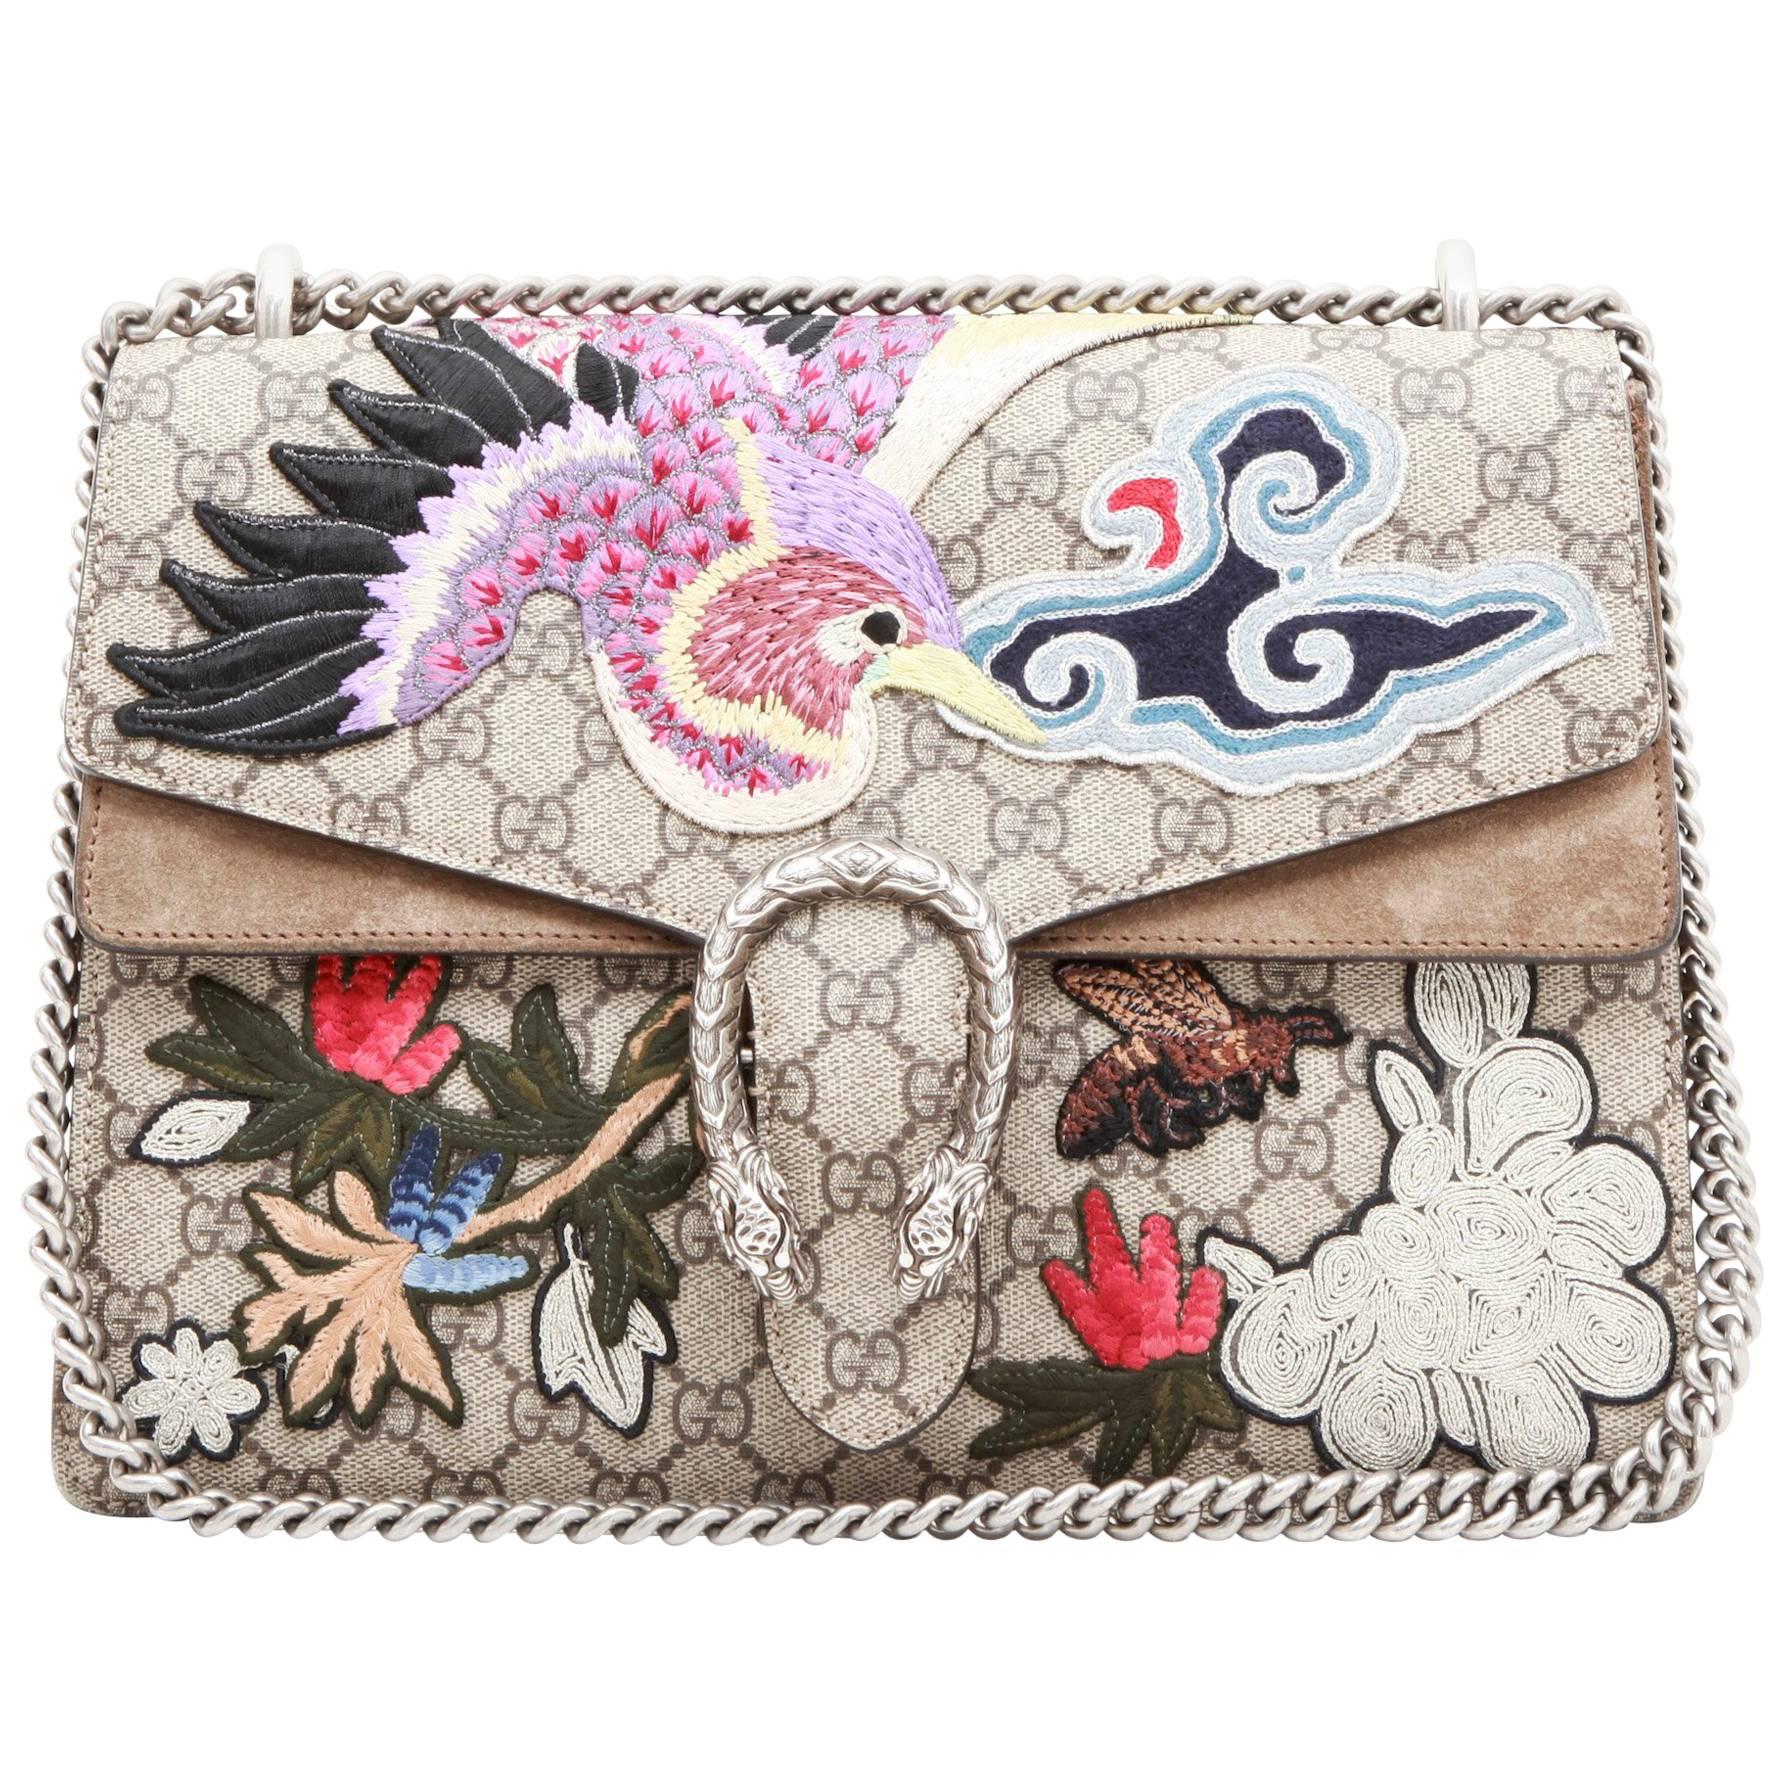 GUCCI Dionysus Flap Bag in GG Supreme Canvas with Suede and Embroideries